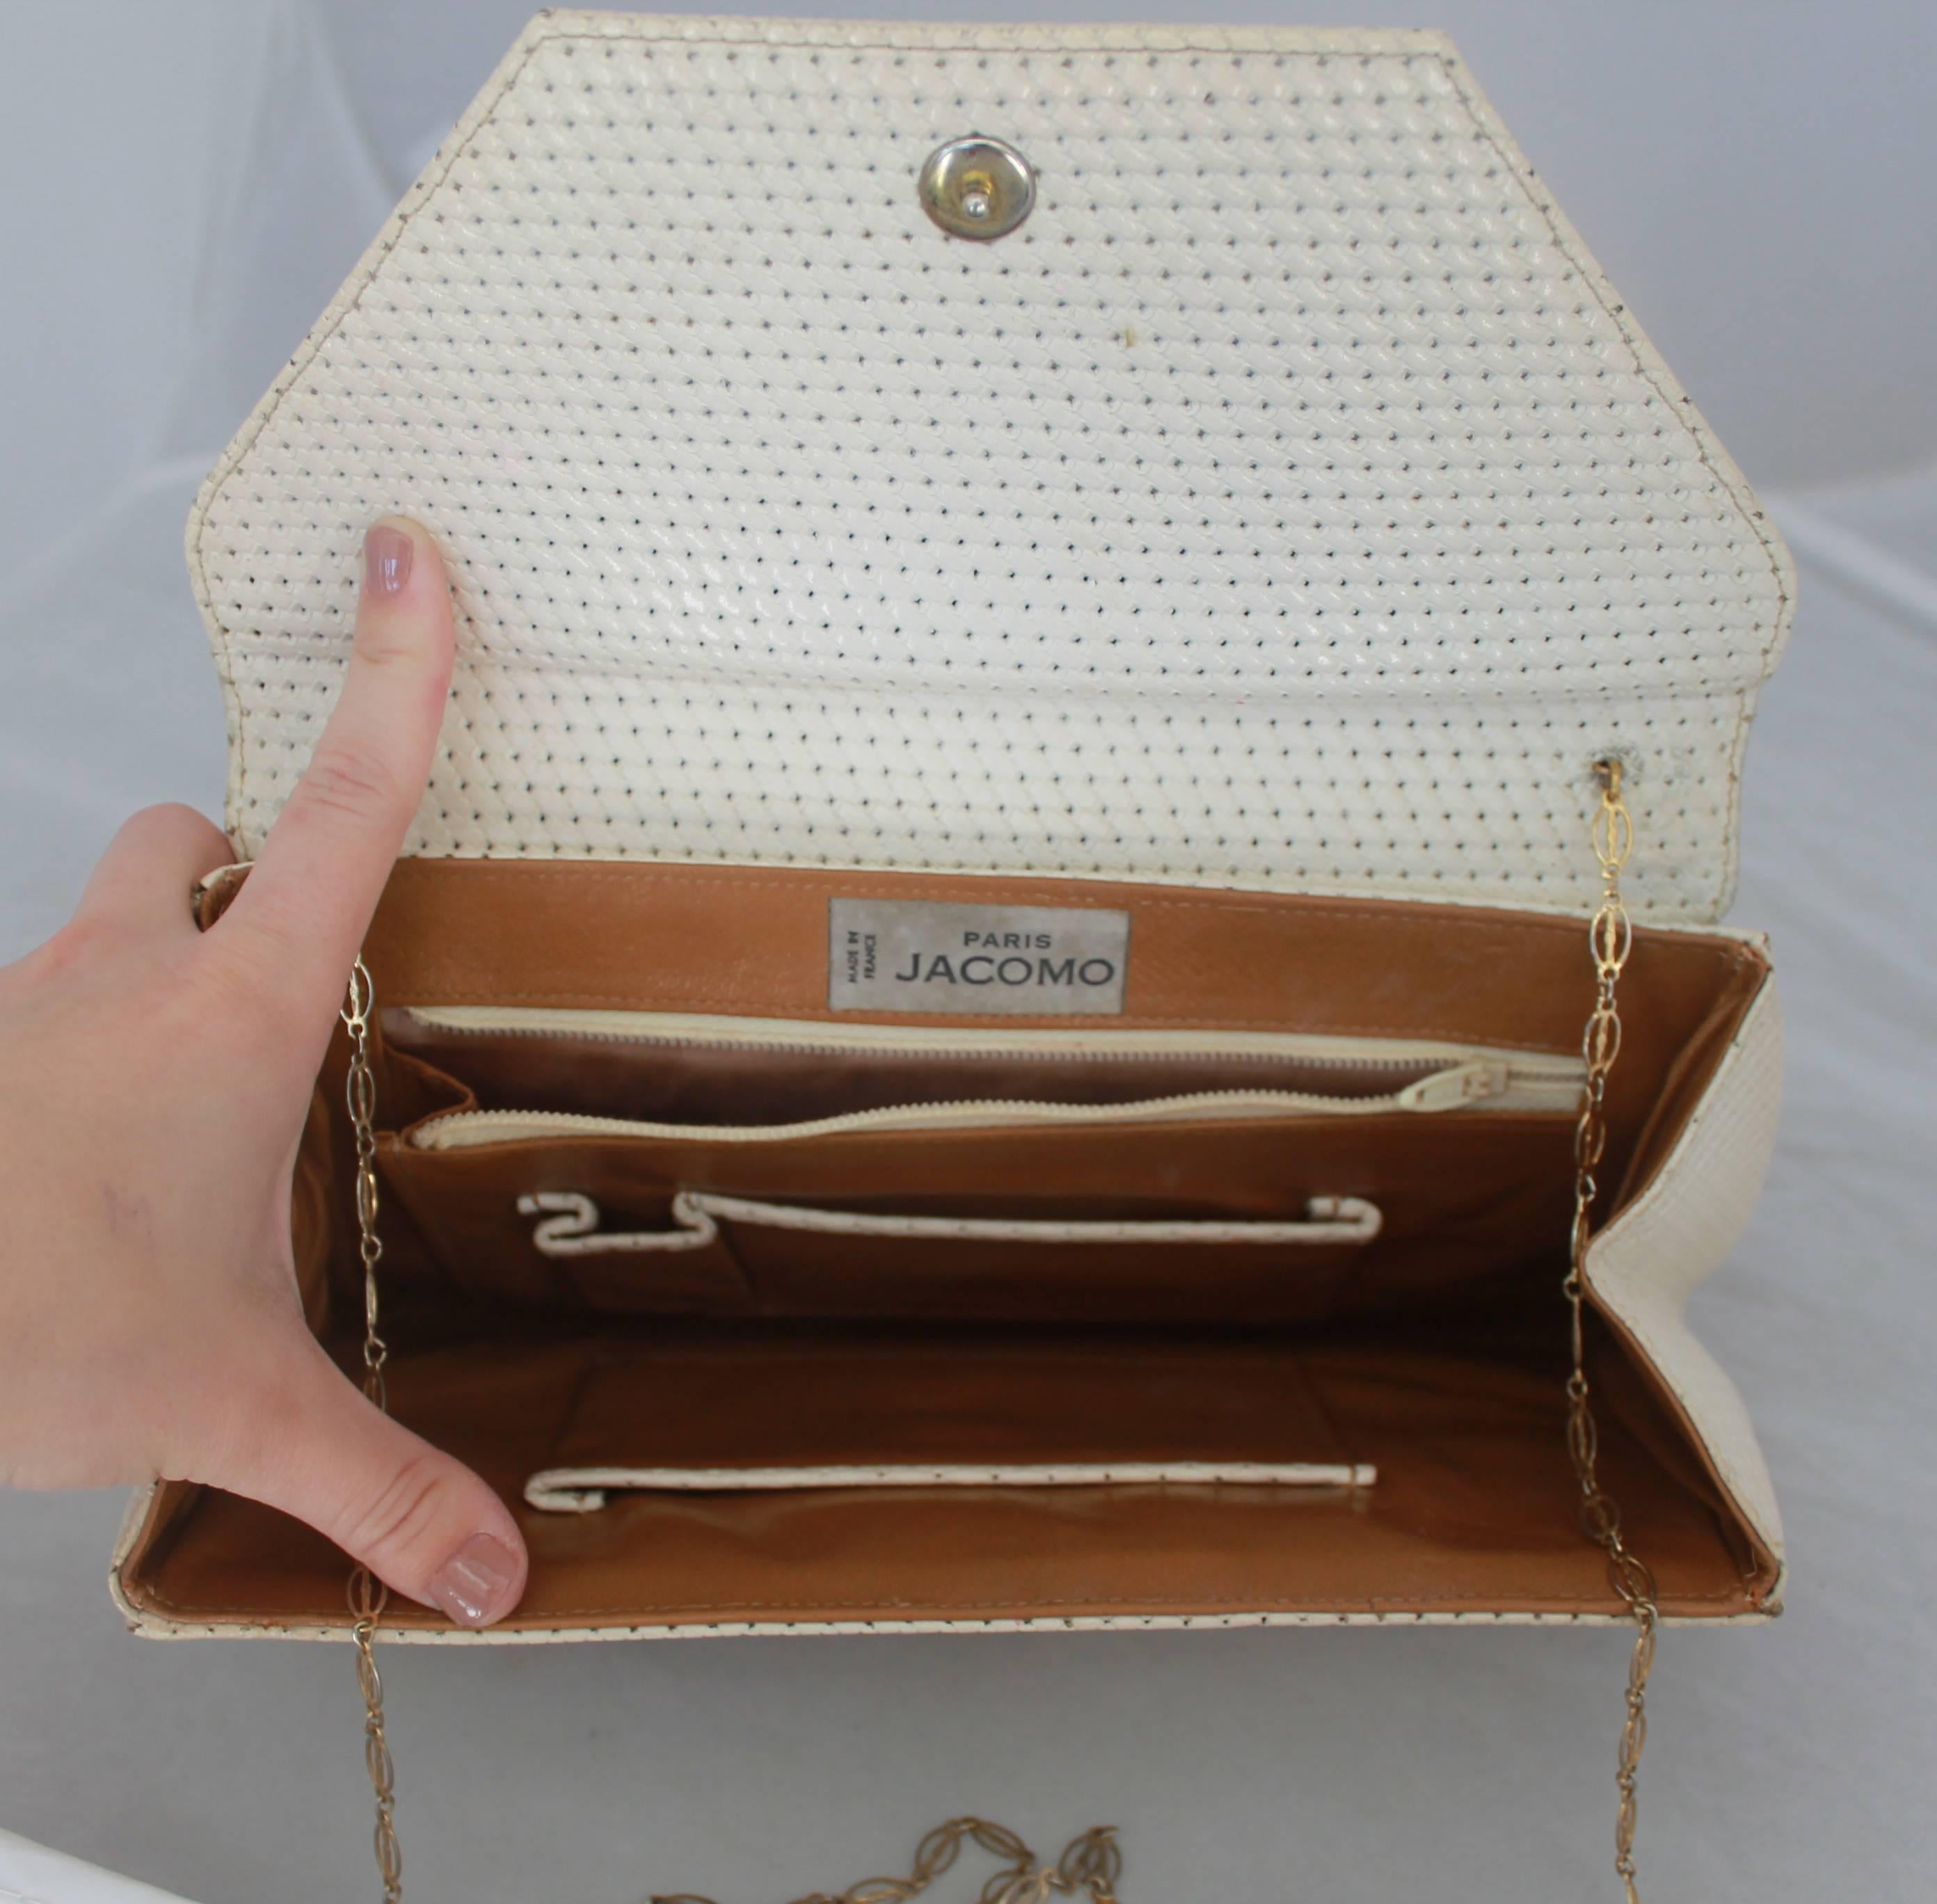 Women's or Men's Paris Jacomo Ivory Perforated Leather Clutch with Green Stone - circa 1980's 